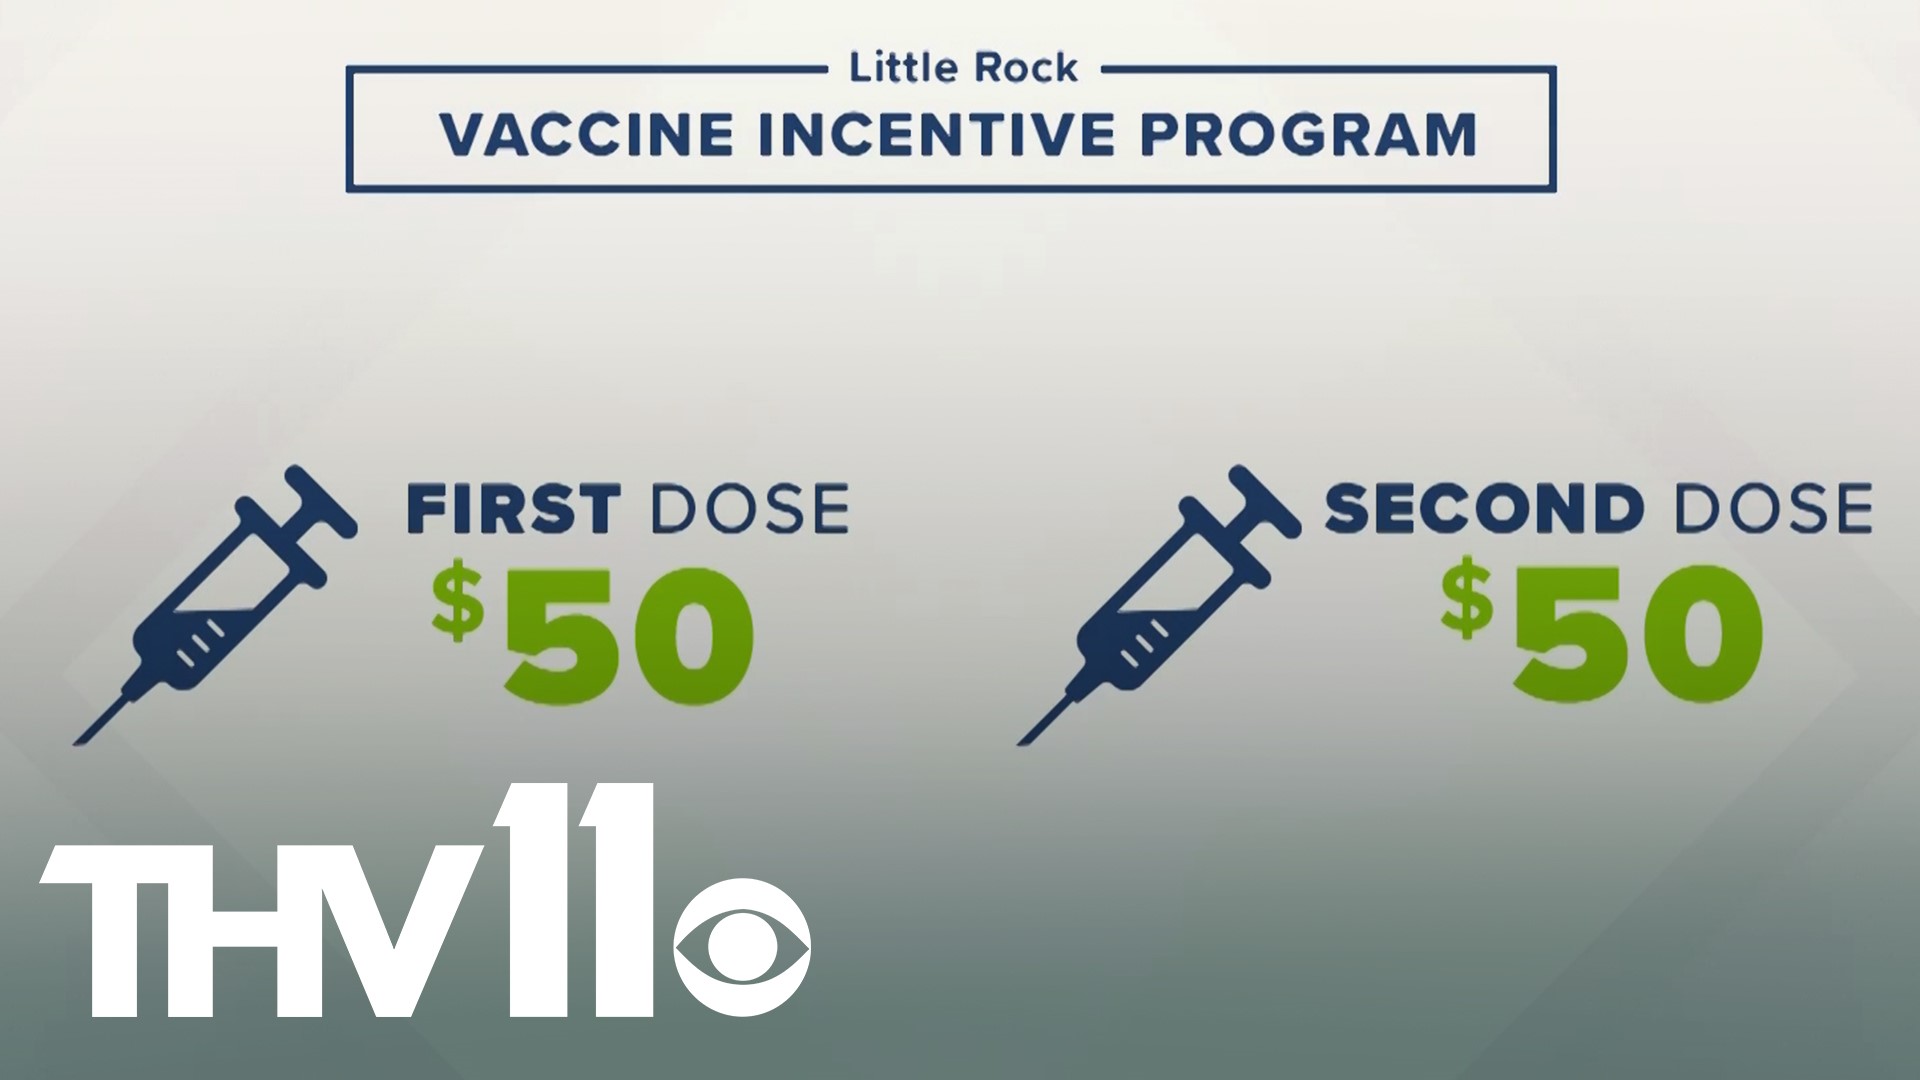 We've seen vaccine incentive programs come and go across the Natural State, and now Little Rock is introducing one of its own.